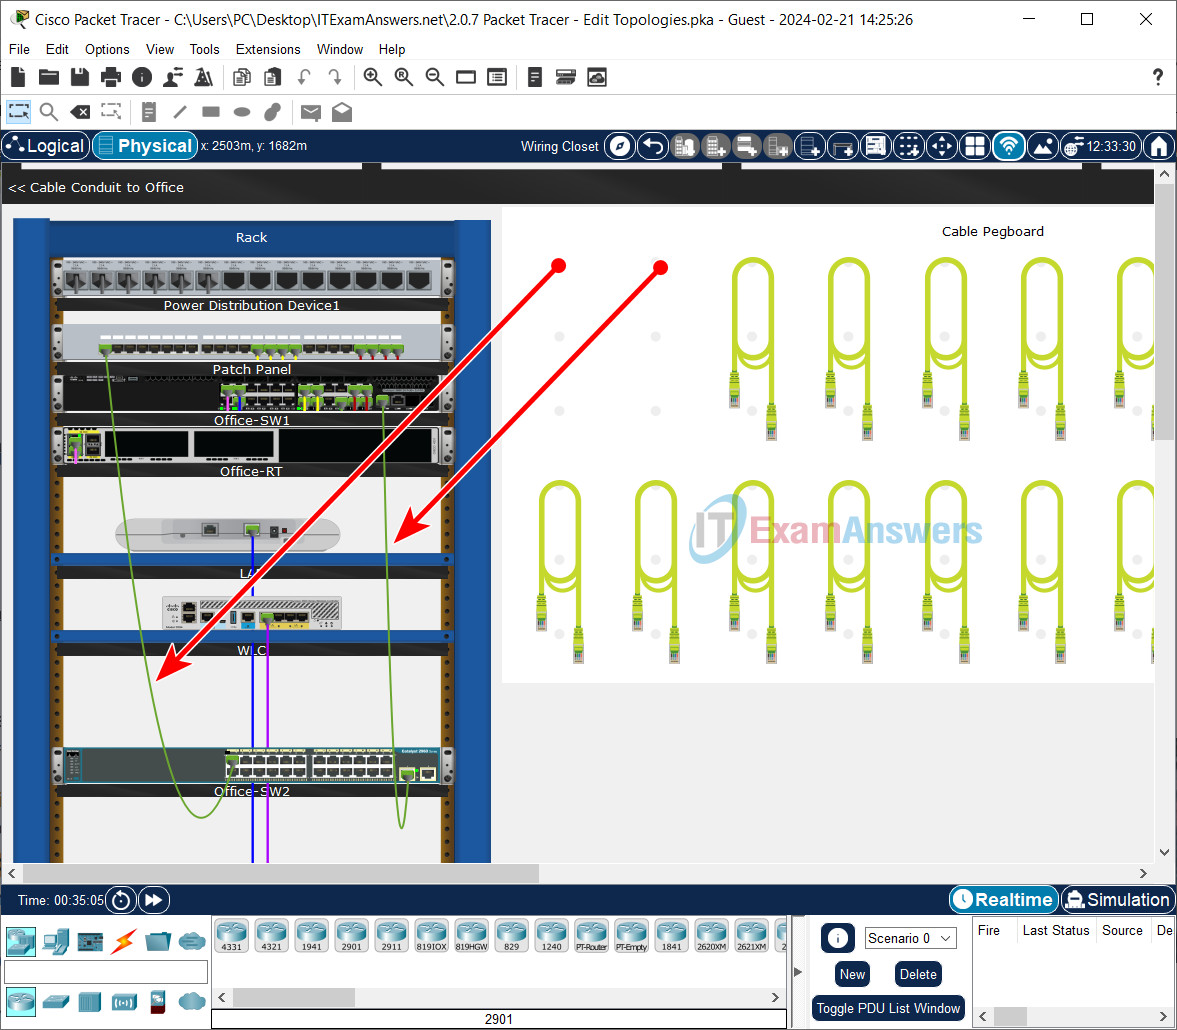 2.0.7 Packet Tracer - Edit Topologies Answers 21